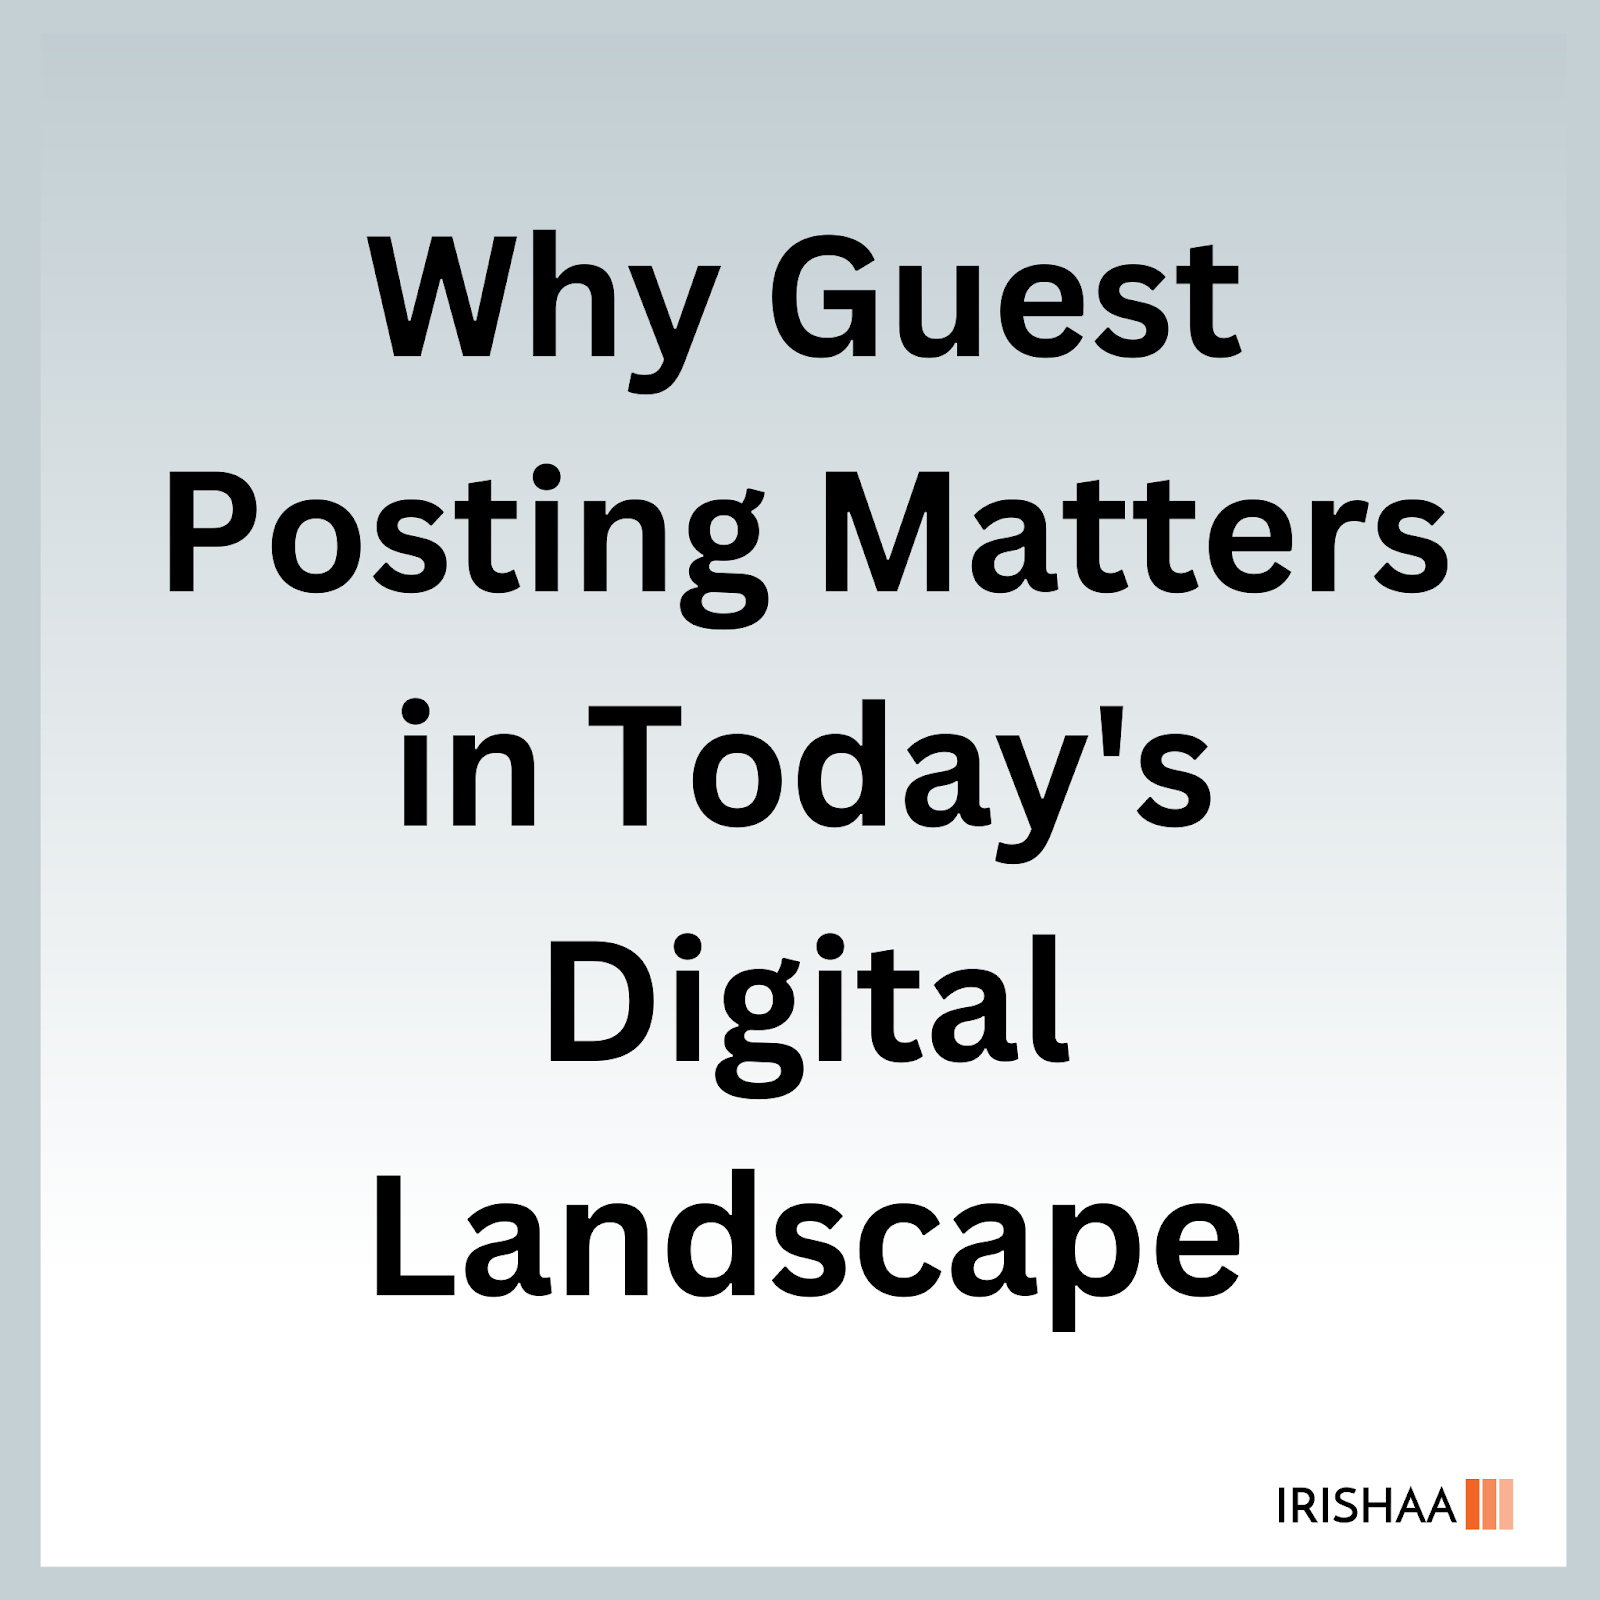 Why Guest Posting Matters in Today's Digital Landscape
